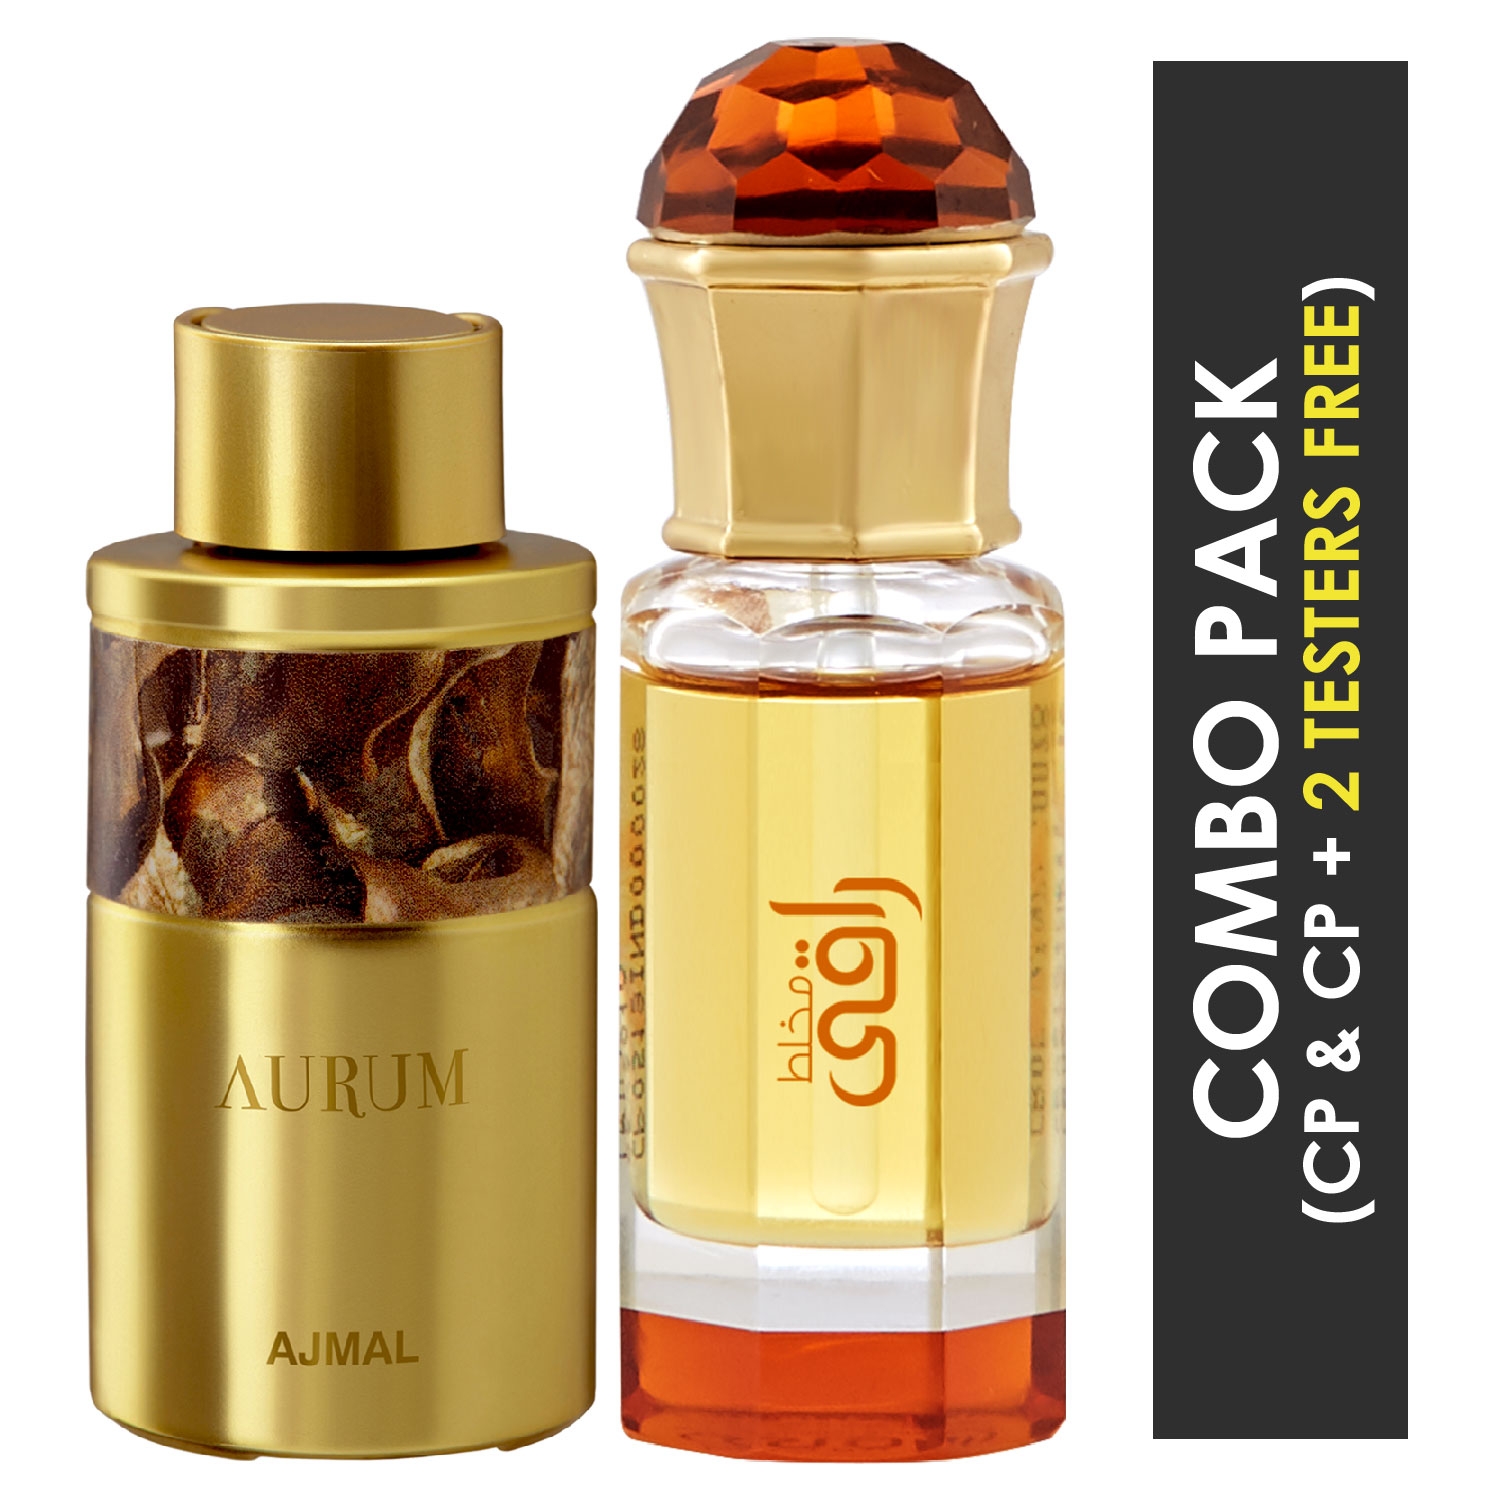 Ajmal | Ajmal Aurum Concentrated Perfume Attar 10ml for Women and Mukhallat Raaqi Concentrated Perfume Attar 10ml for Unisex + 2 Parfum Testers FREE